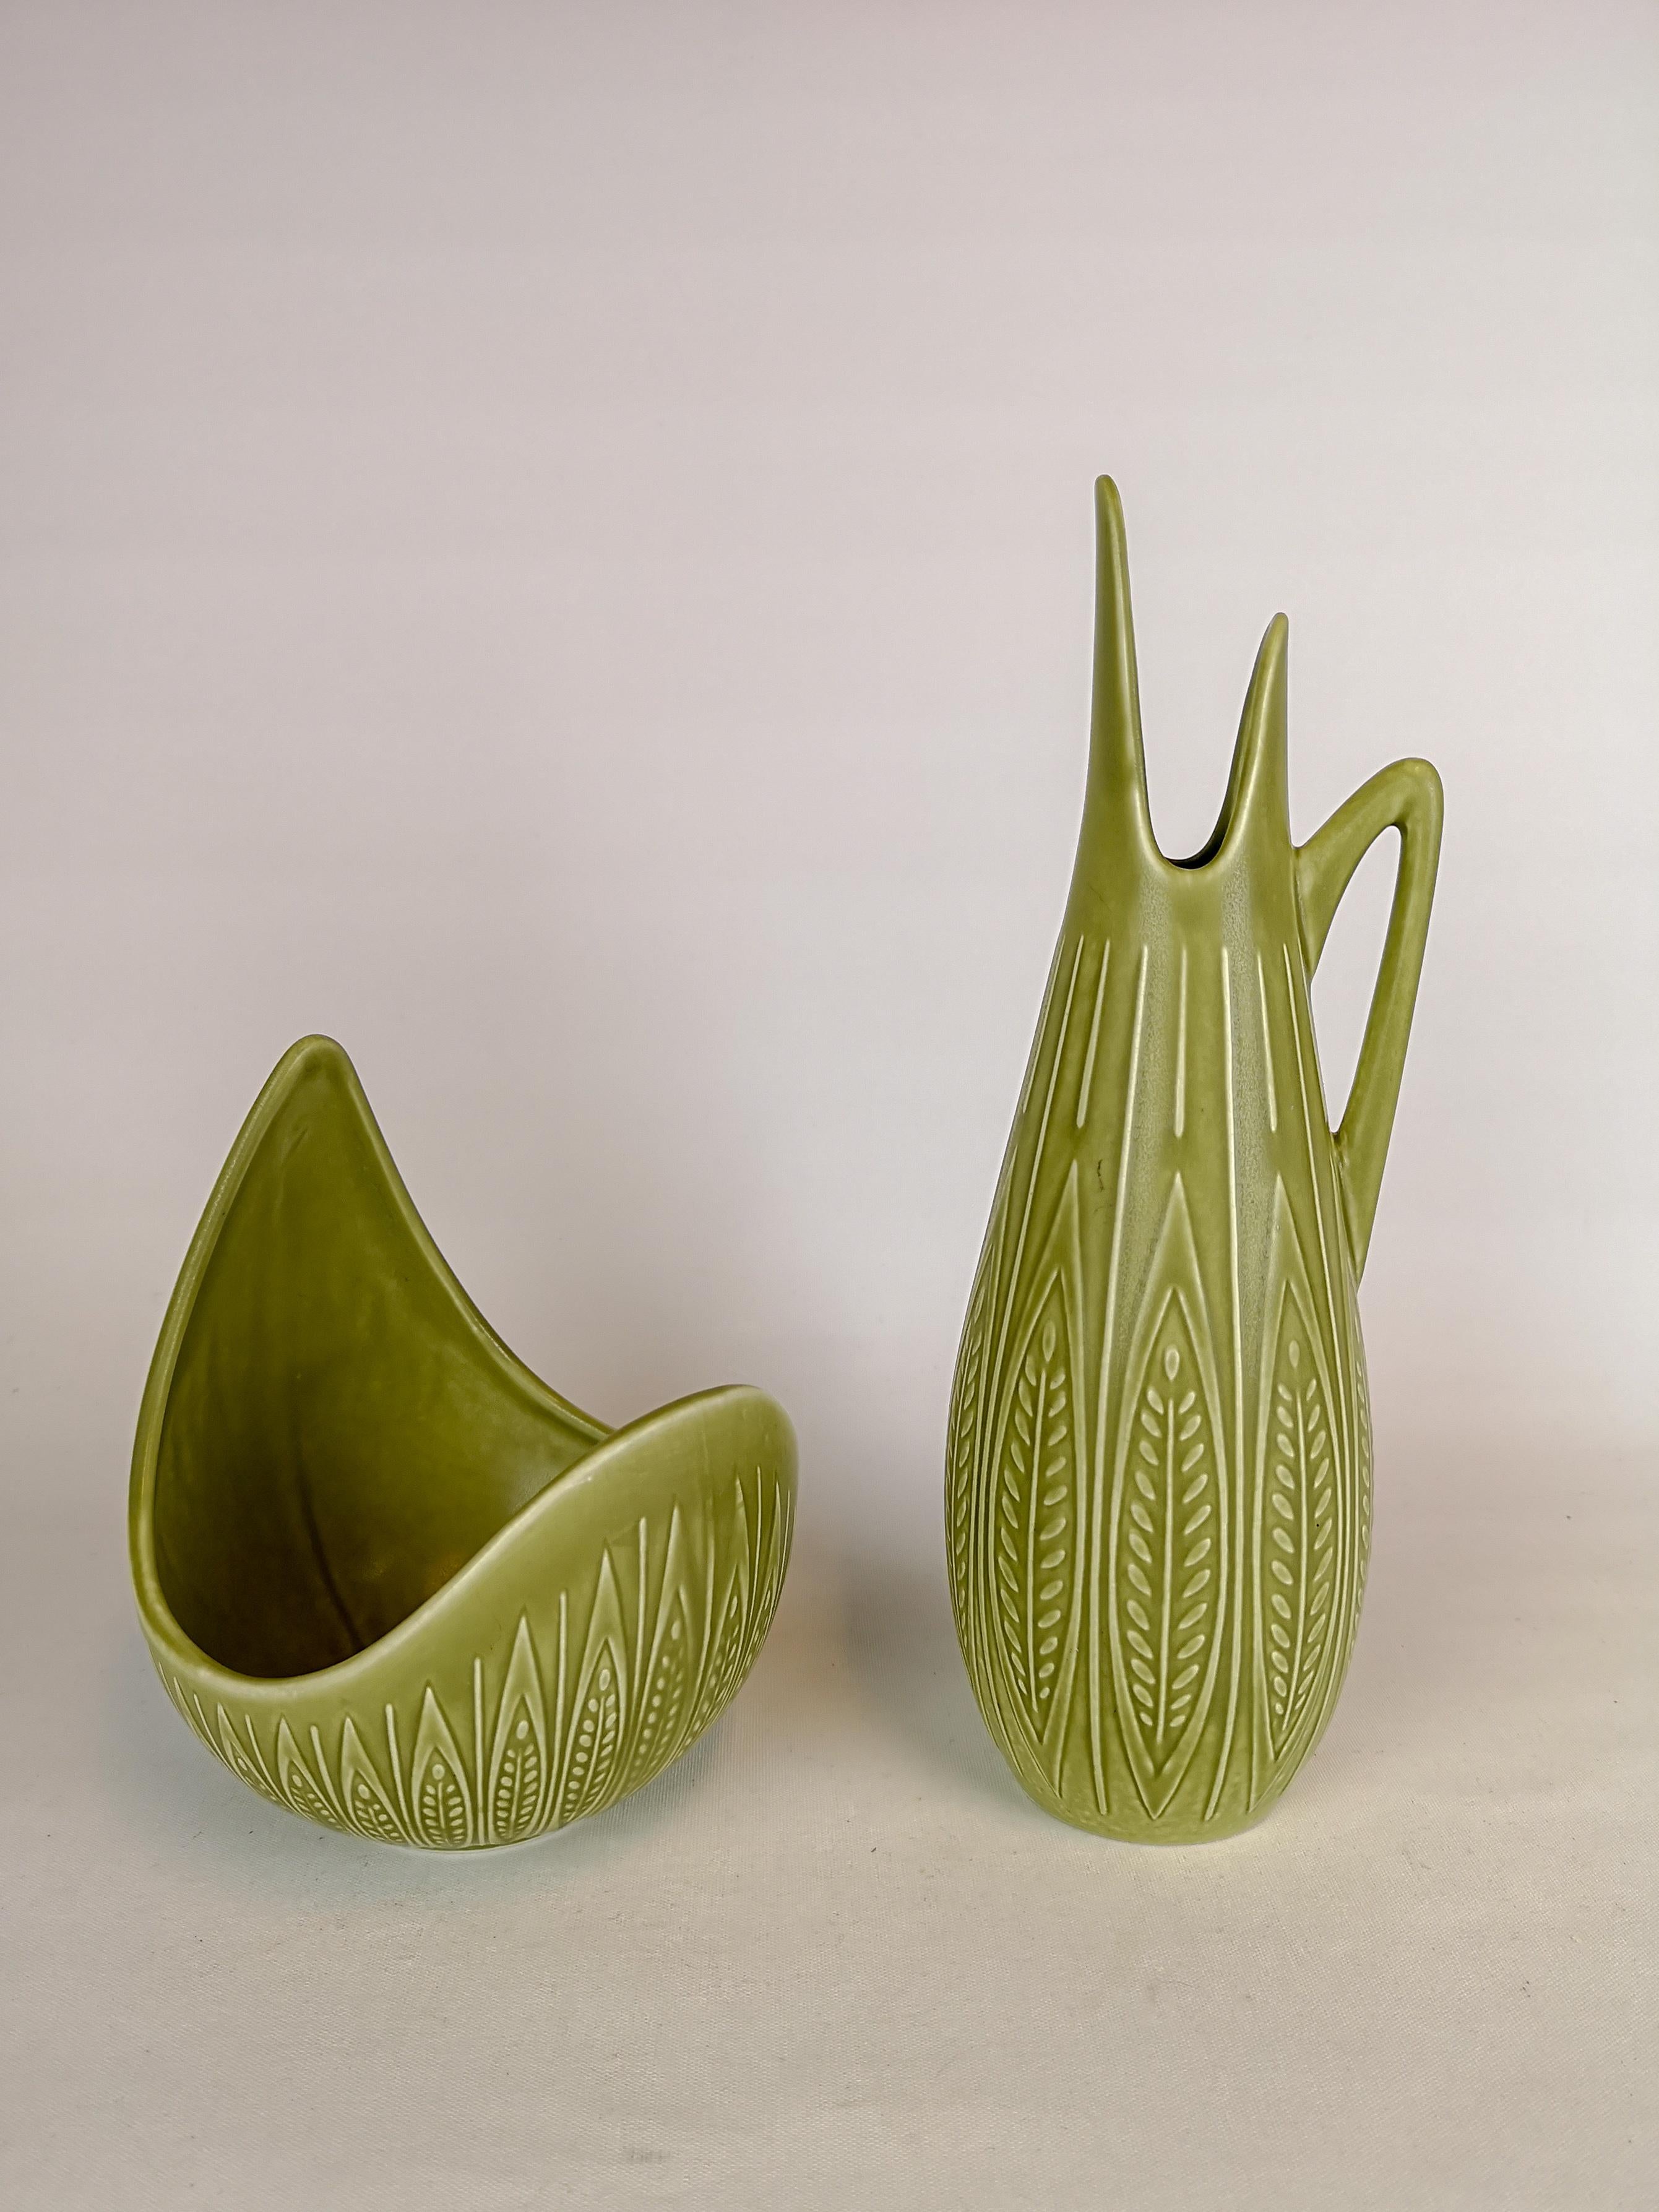 This set of two ceramic pieces bowl and Vase was manufactured in Sweden for Rörstrand in the midcentury and designed by Gunnar Nylund. 

Very good condition.

Measures: Bowl 16 x 16 x 13 cm Vase H 29, D 11 cm.
 